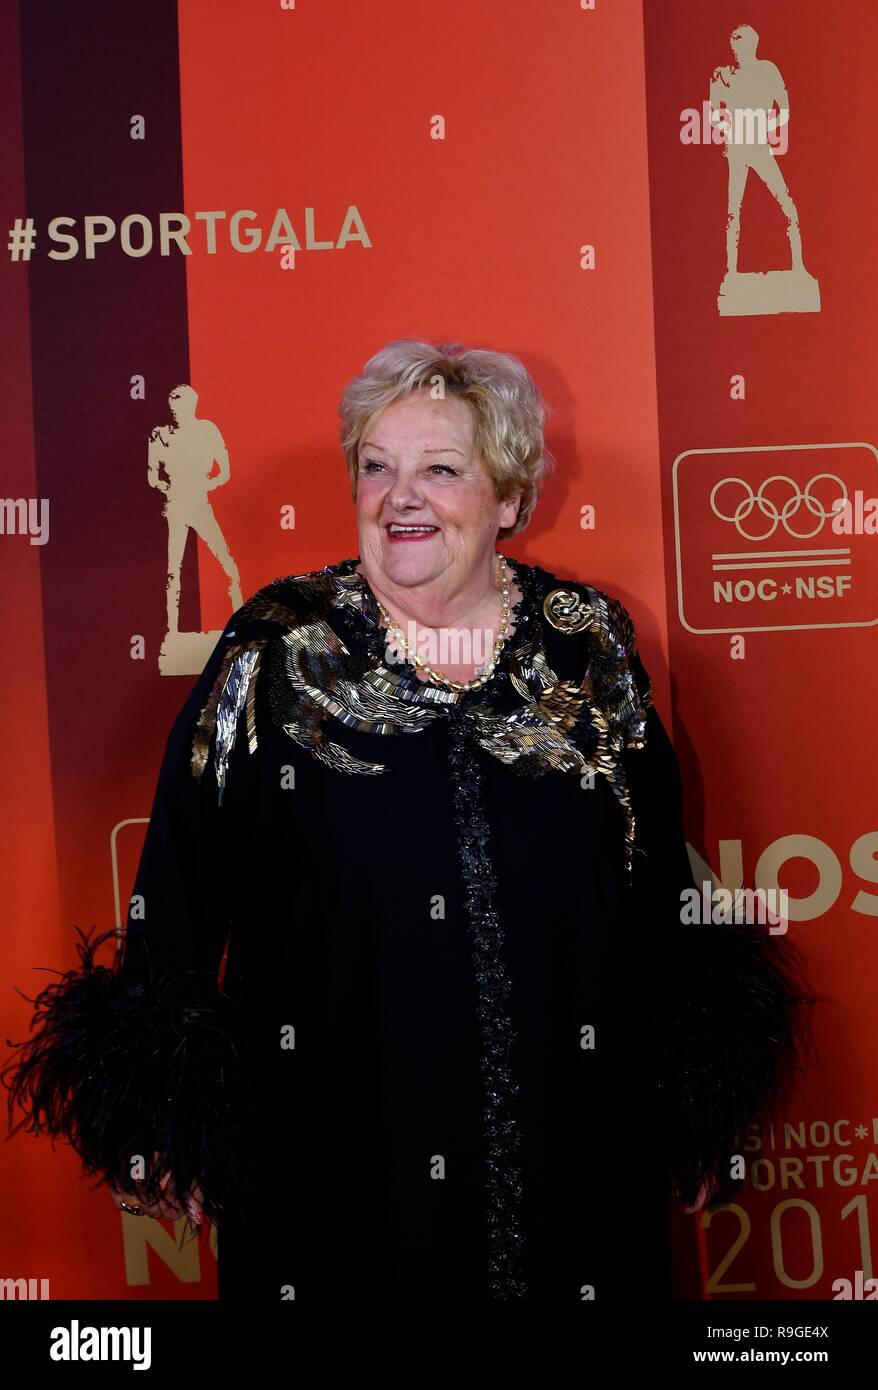 19-12-2018 NOC*NSF SPORTGALA: AMSTERDAM Erica Terpstra (born 26 May 1943) is a retired Dutch politician of the People's Party for Freedom and Democracy (VVD). She is a former swimmer by occupation, participated in the 1960 and 1964 Summer Olympics. Photo: SCS/Soenar Chamid/AFLO Stock Photo